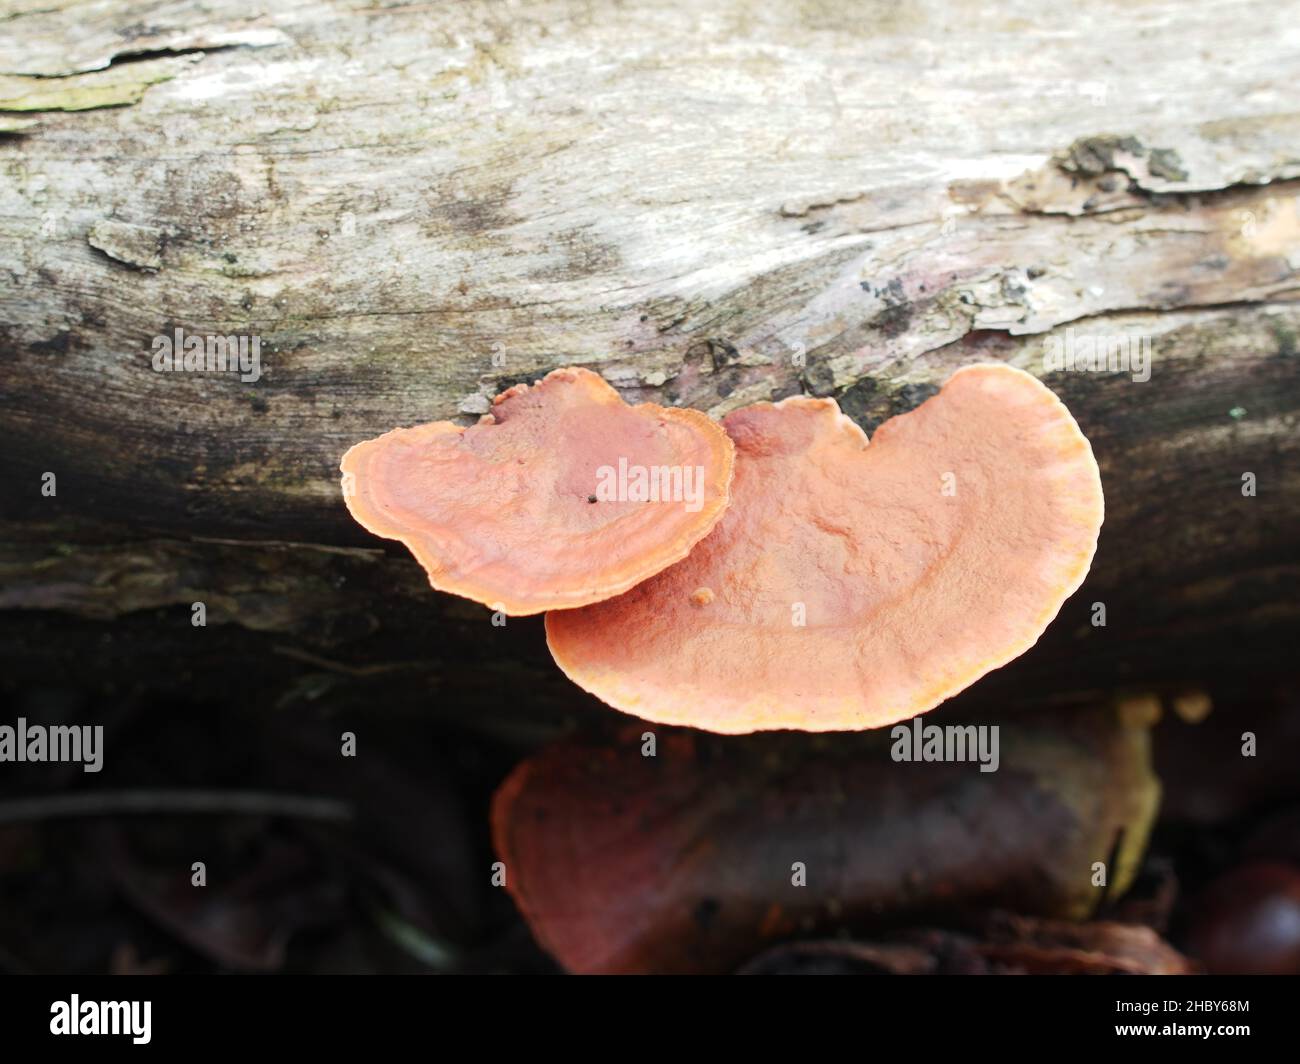 Parasitic fungus from the family Fomitopsidaceae that grows on fallen wood Stock Photo